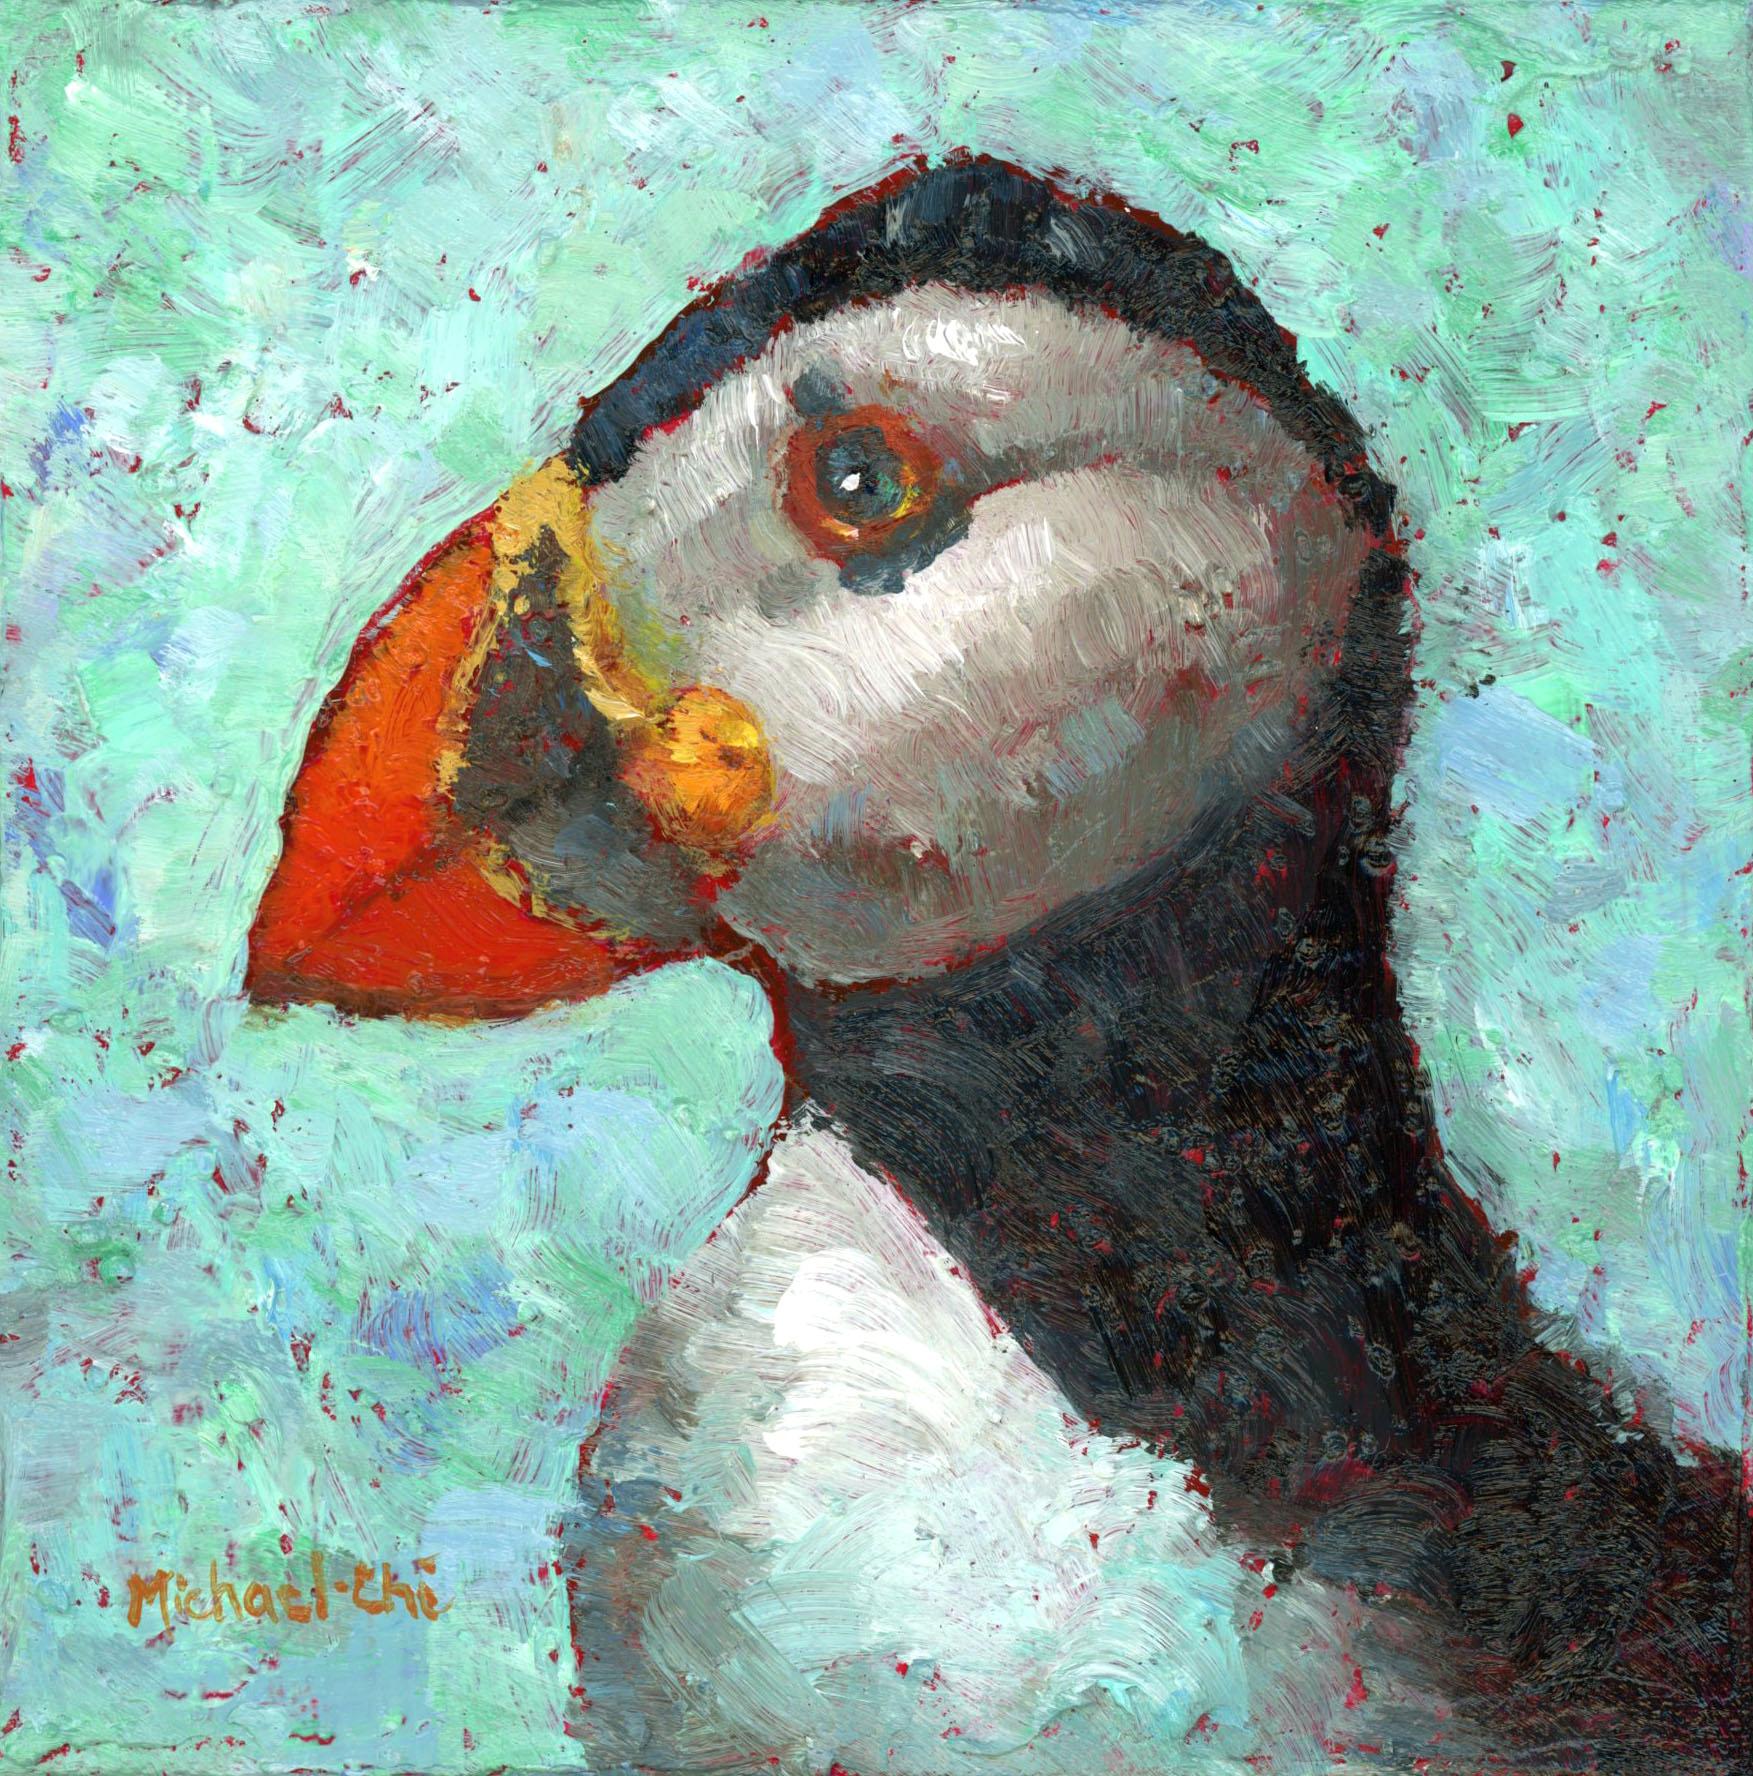 Michael-Che Swisher Animal Painting - "Why, Yes I Do" Oil painting of a puffin over a turquoise background 